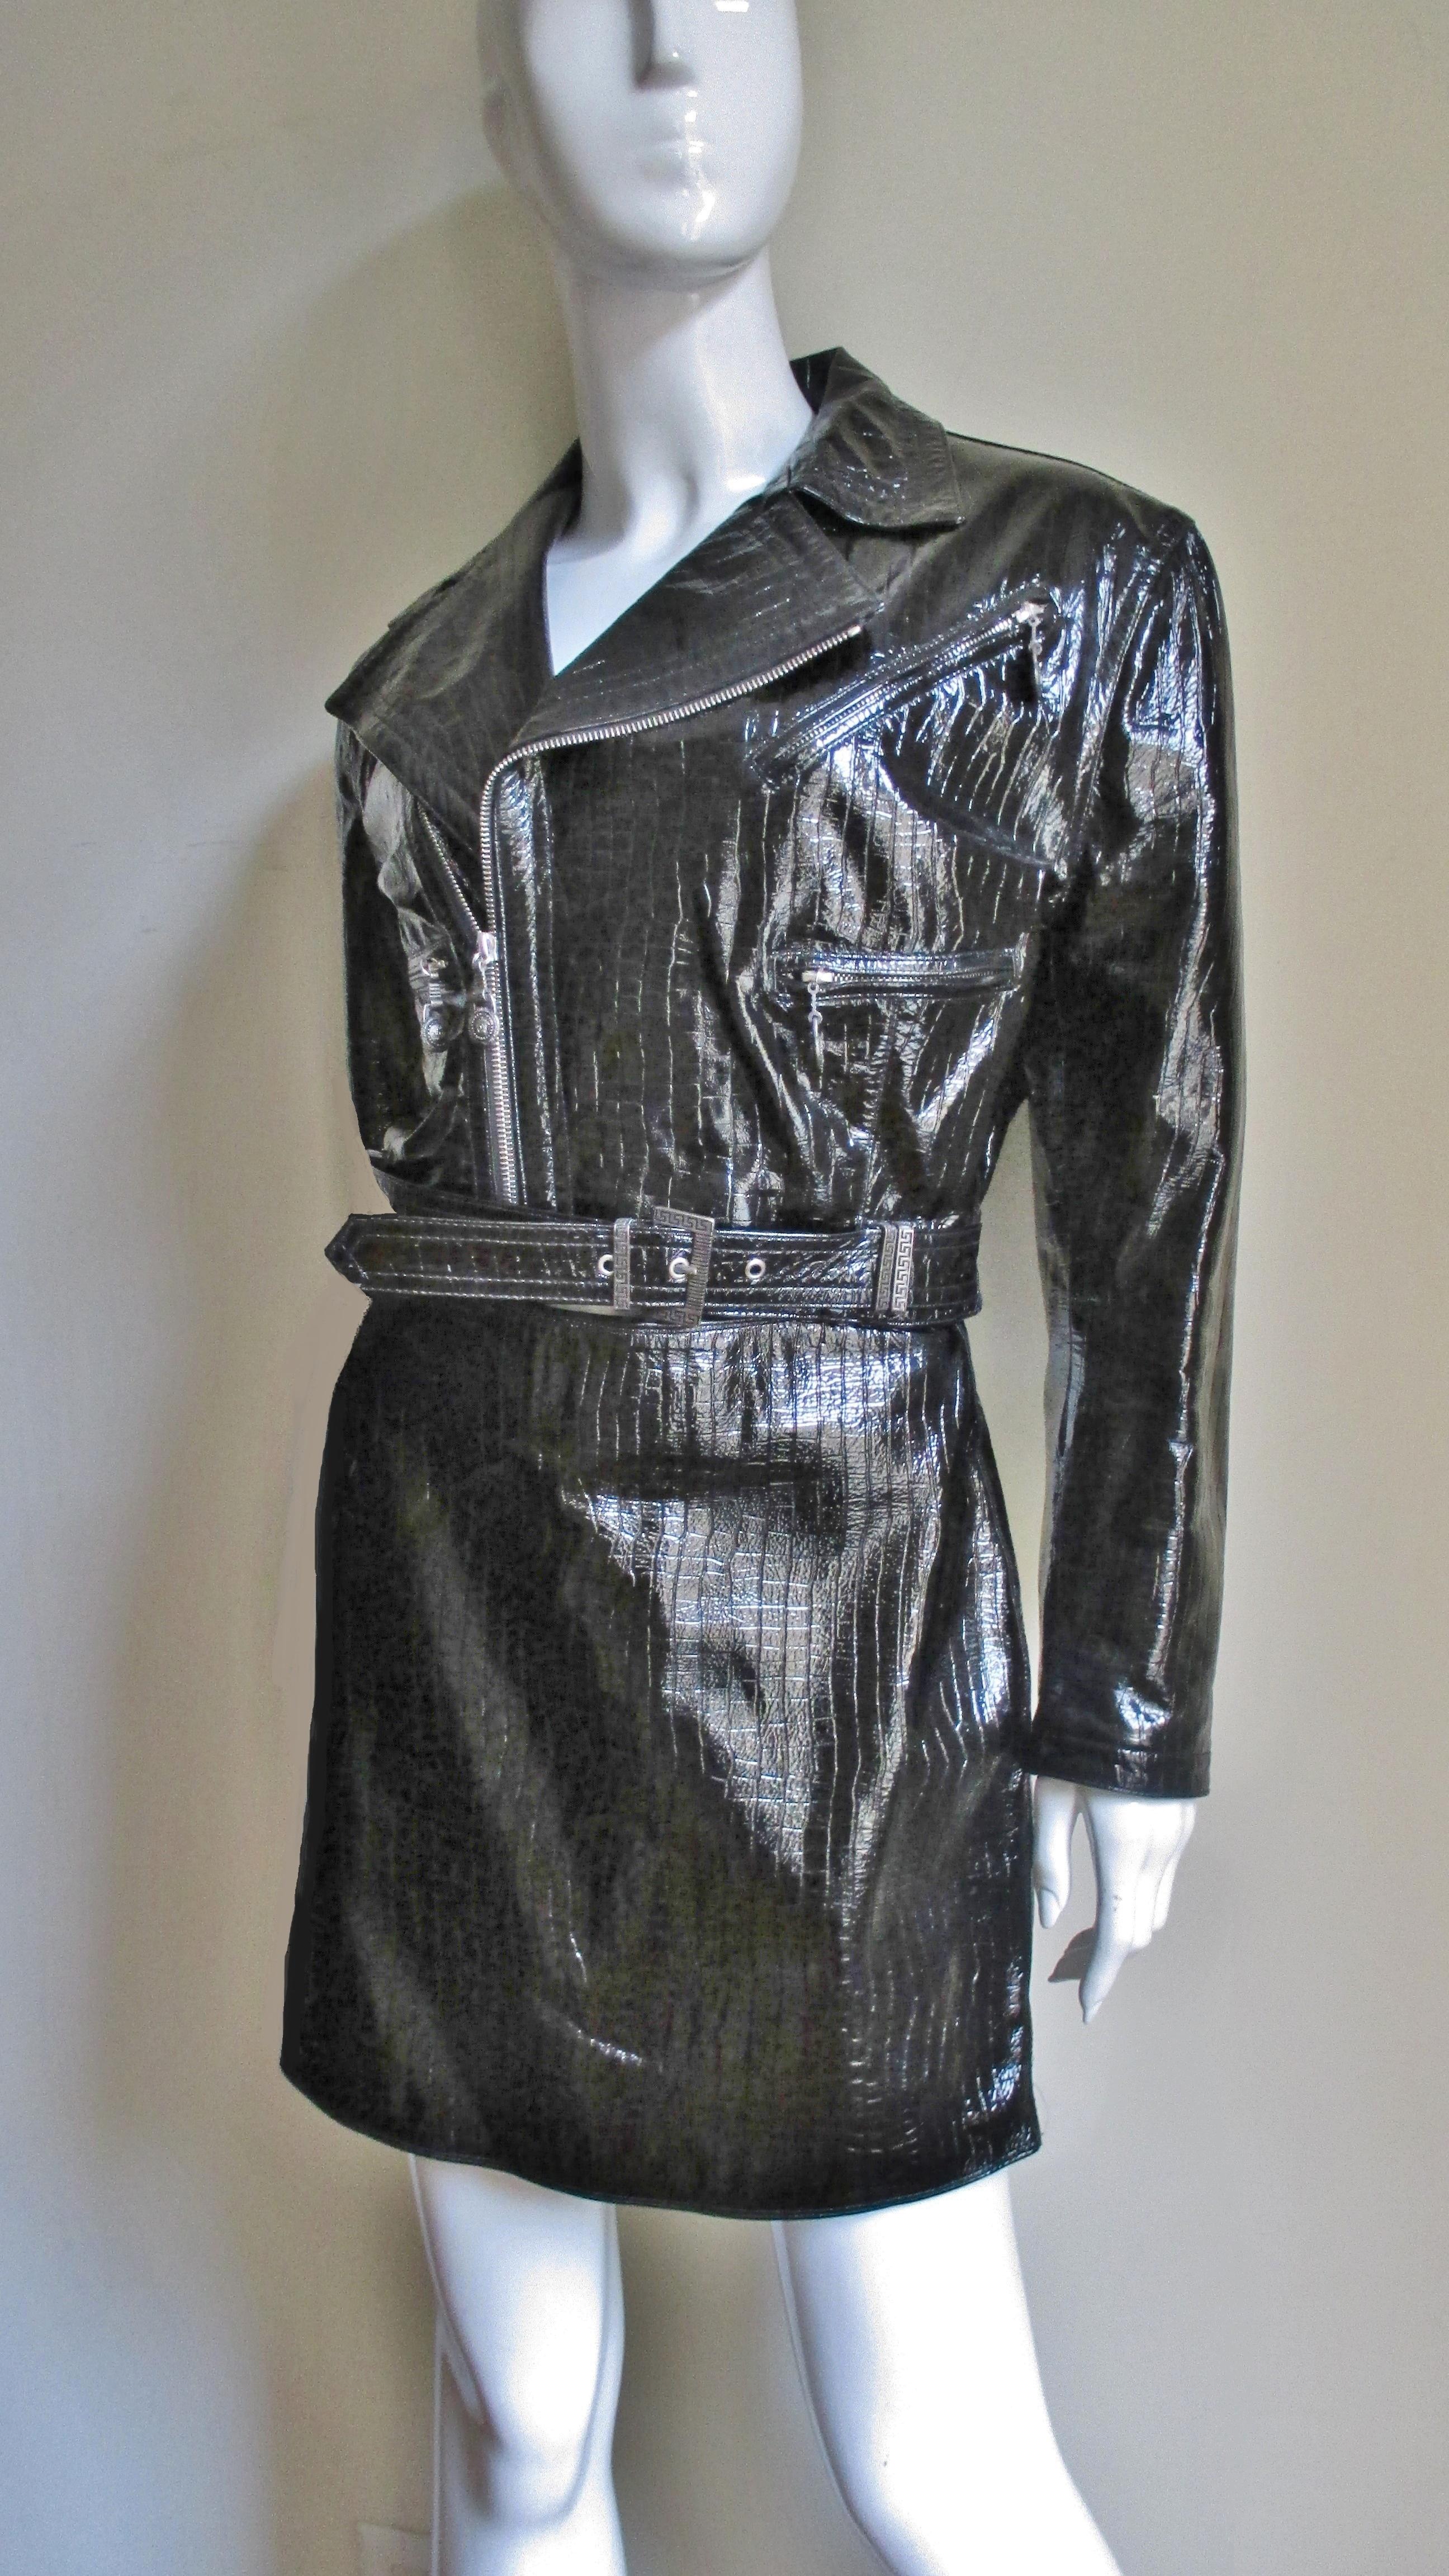 A great black patent leather motorcycle jacket with matching  skirt from Gianni Versace. Present is Versace's impeccable attention to detail including Medusa's head pulls on center front zip (which can also be used to zip jacket closed to the neck),